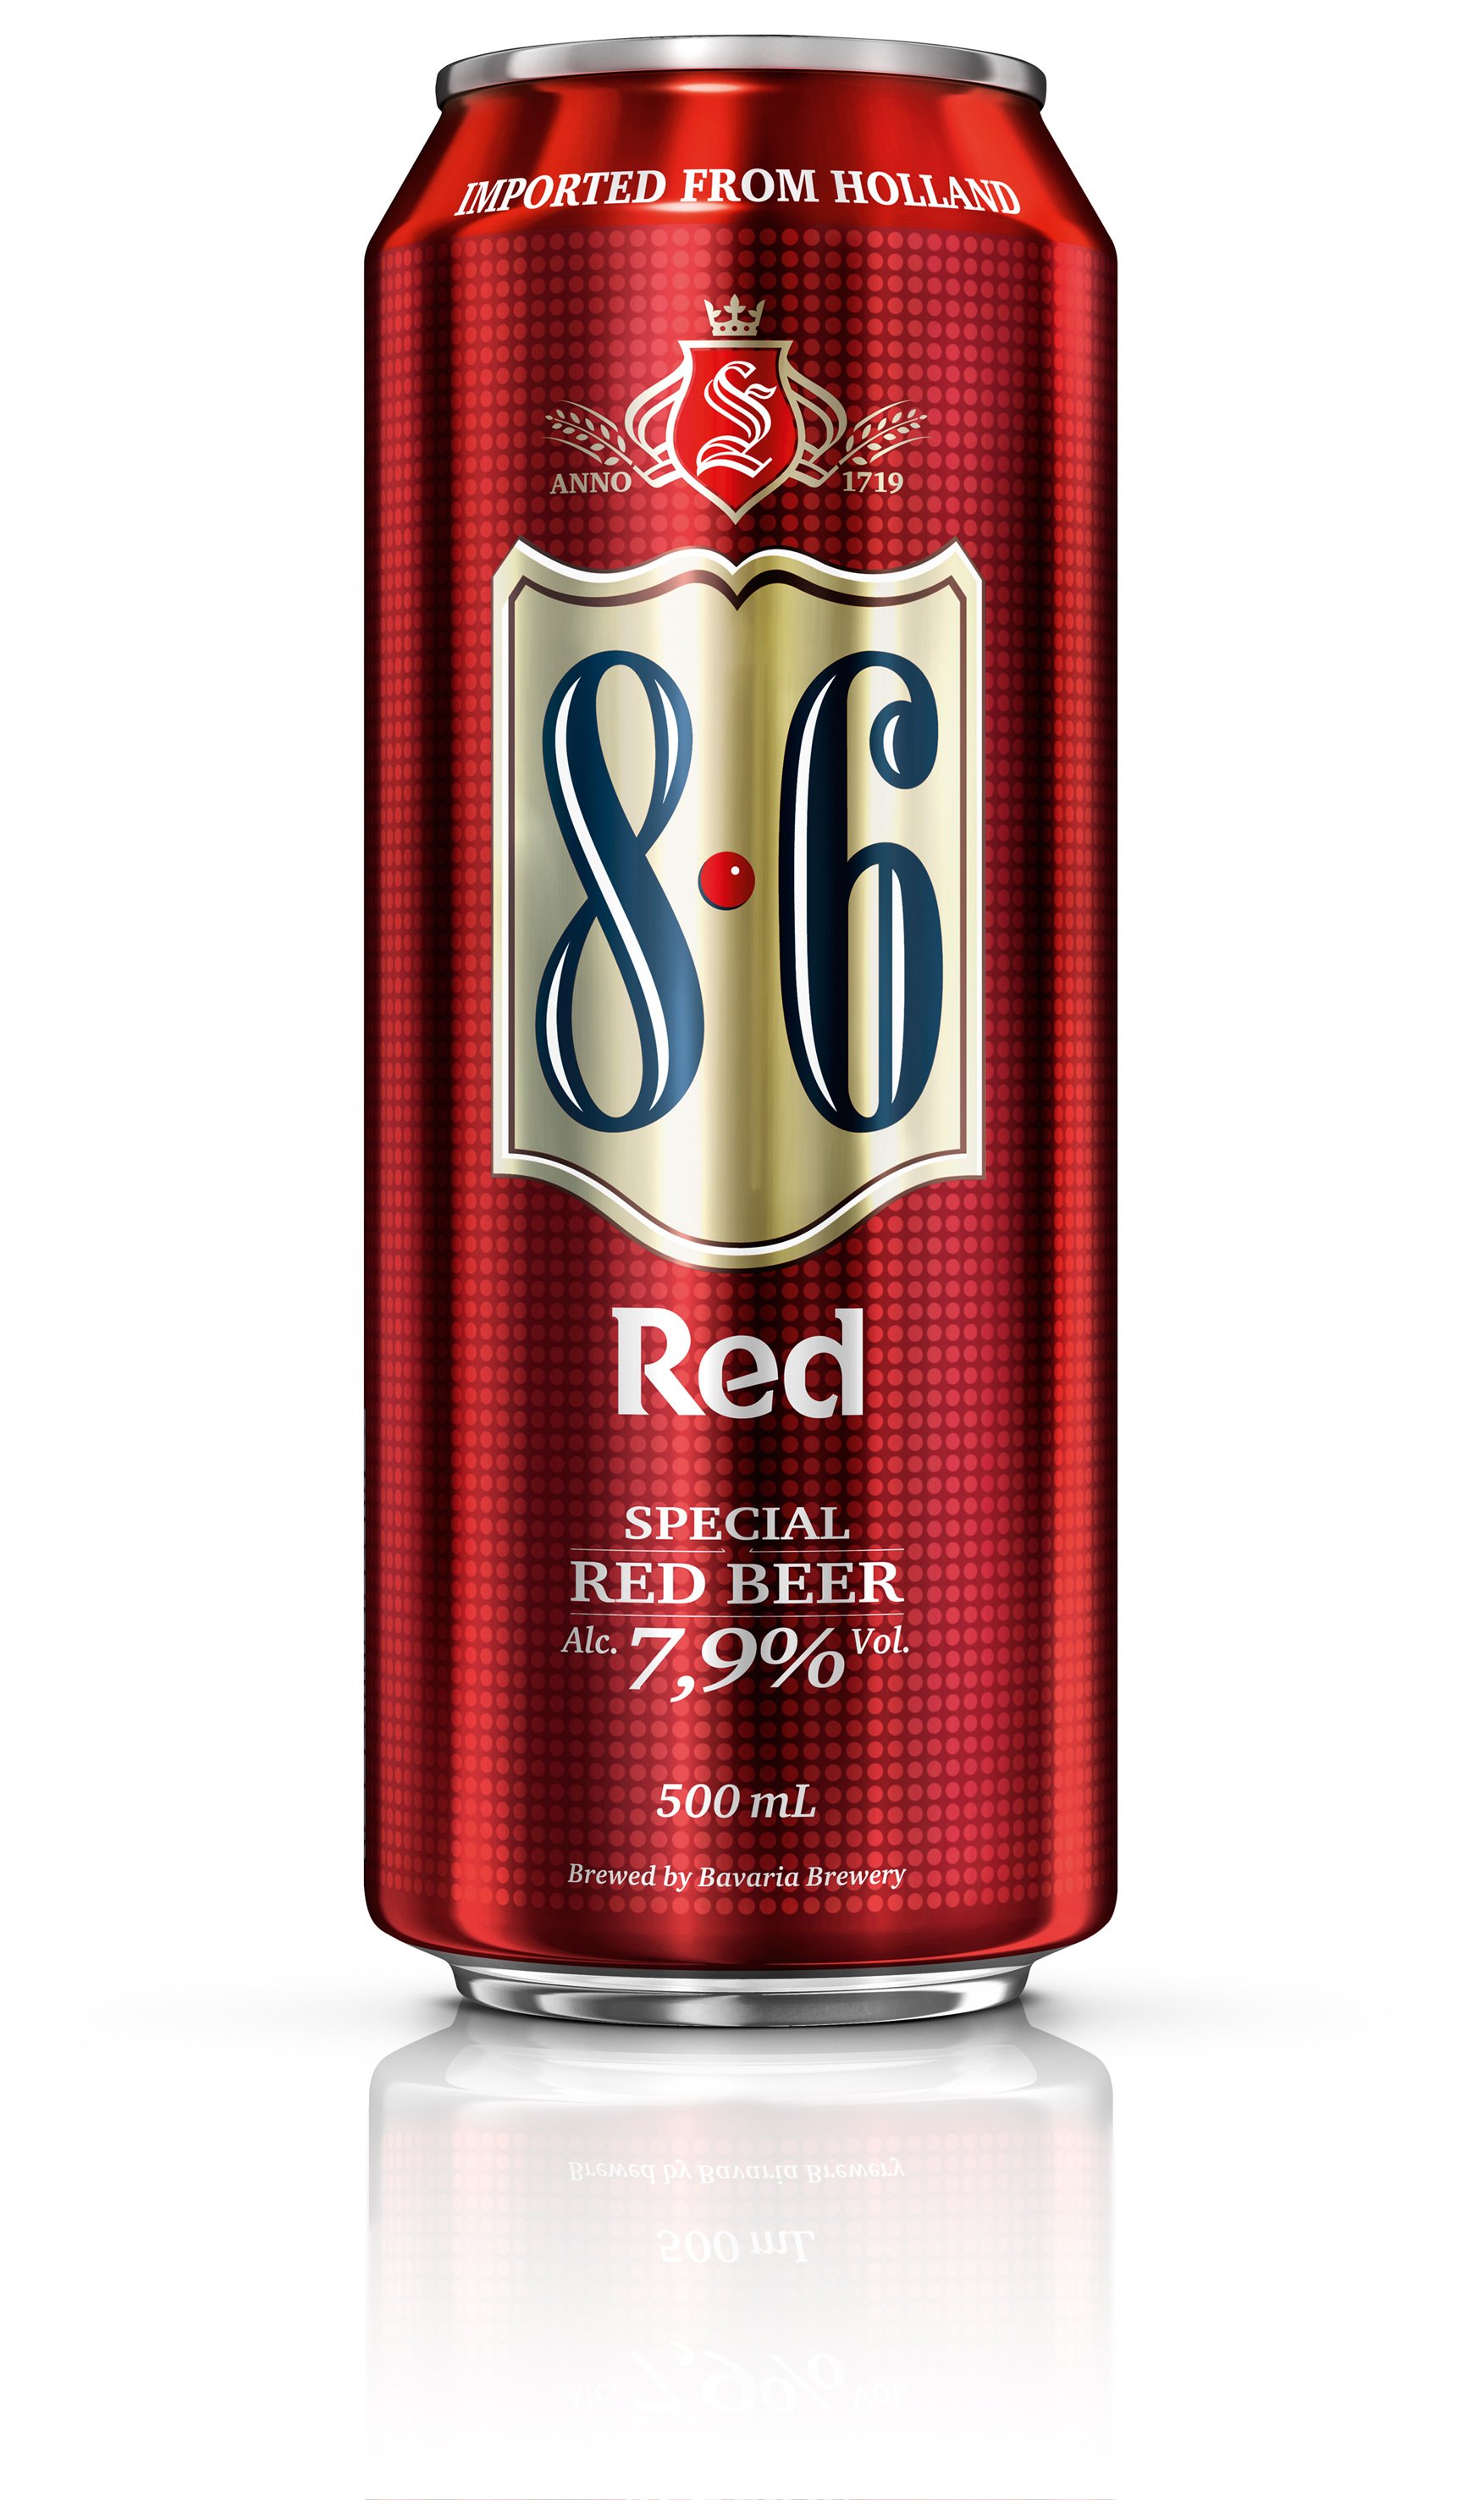 8.6 Red